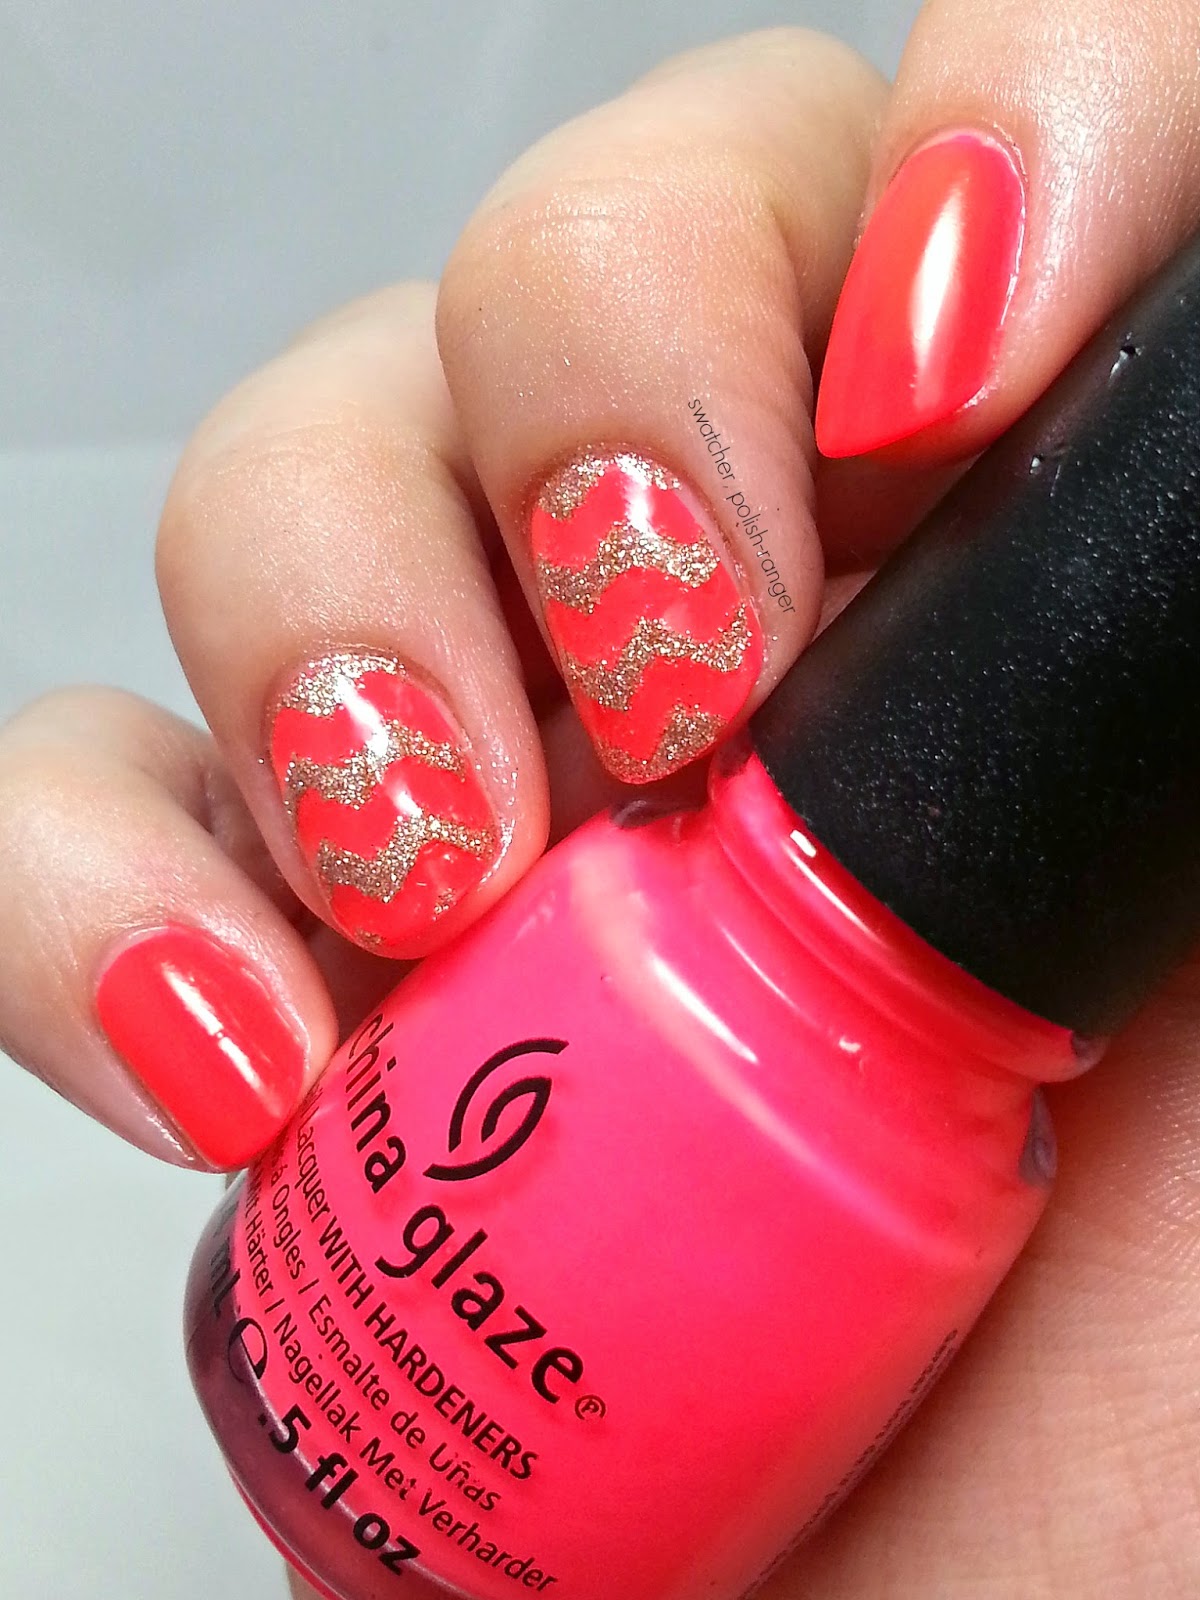 China Glaze Pool Party with Champagne Kisses used as chevron accents